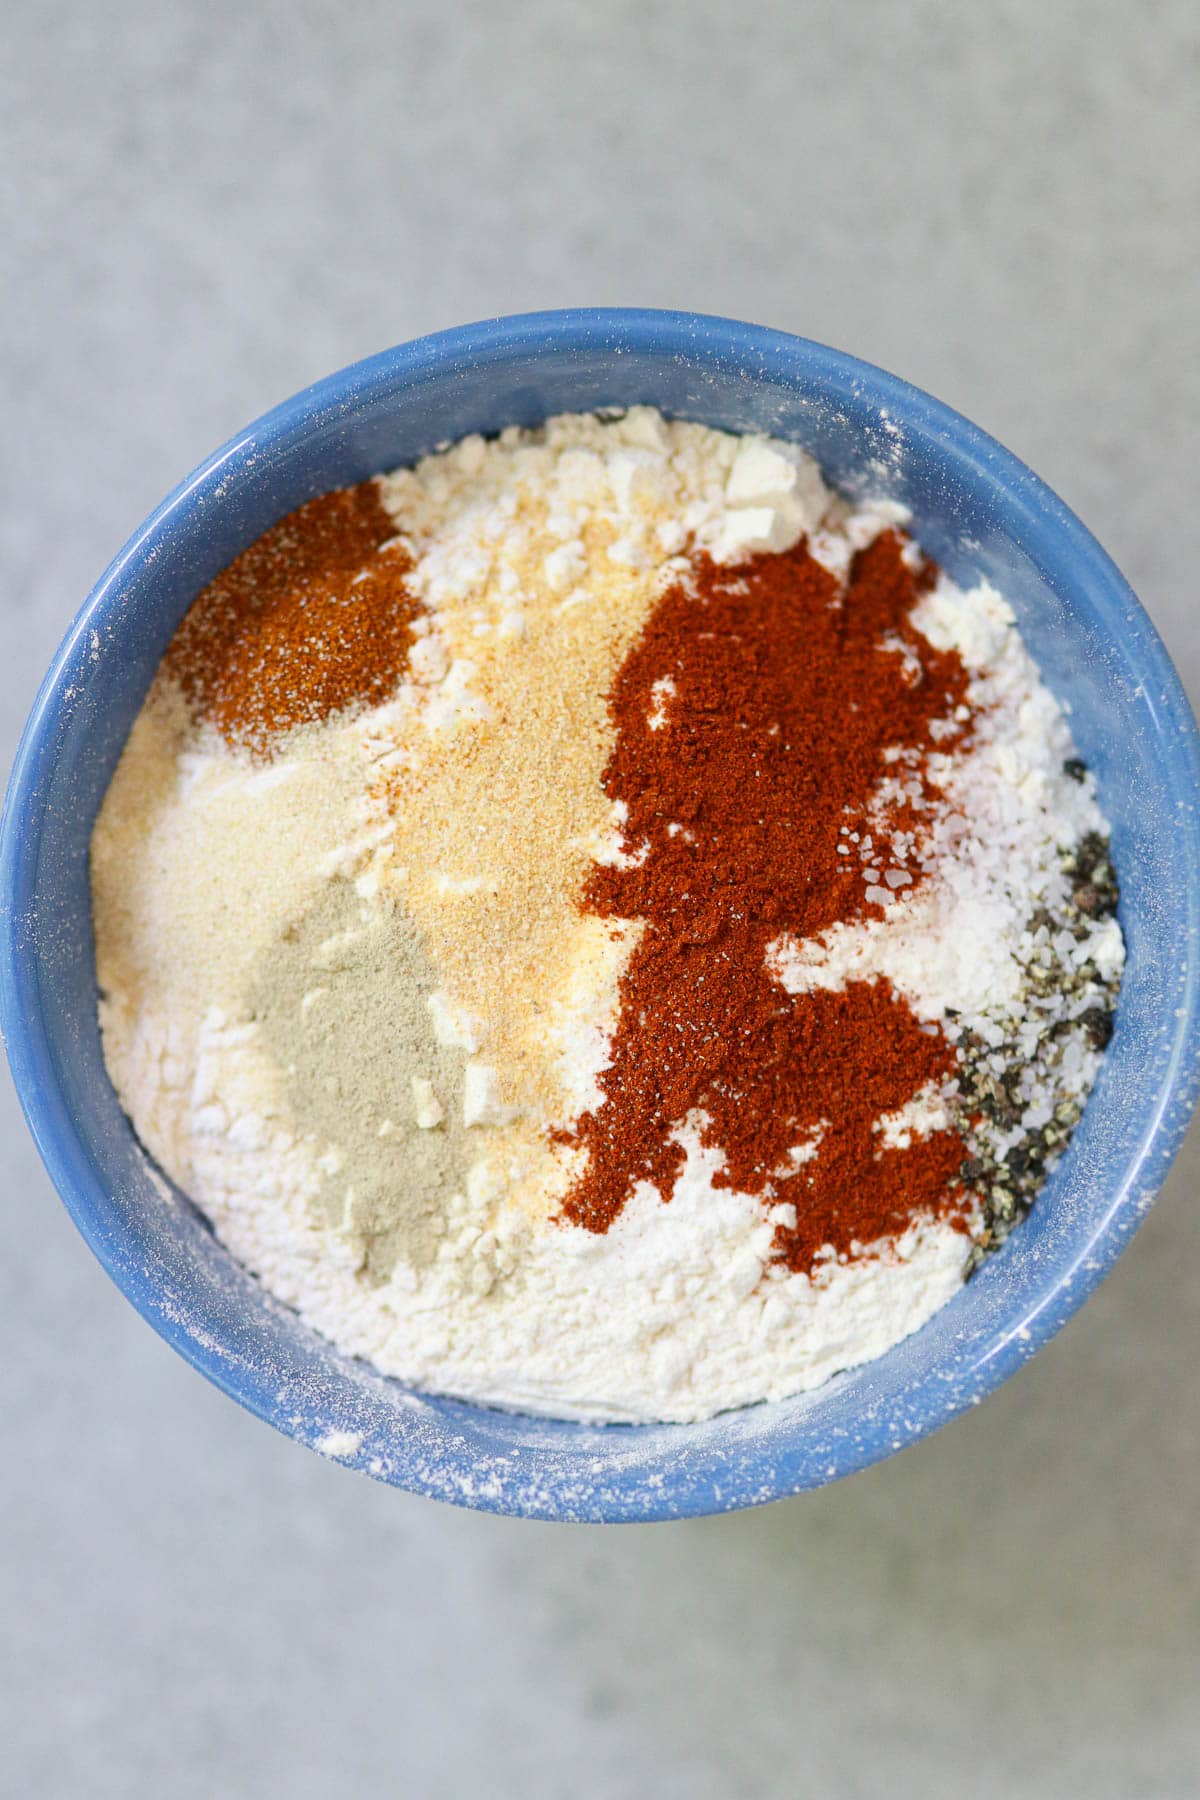 Photo of the spices with the flour before mixing, in a blue bowl